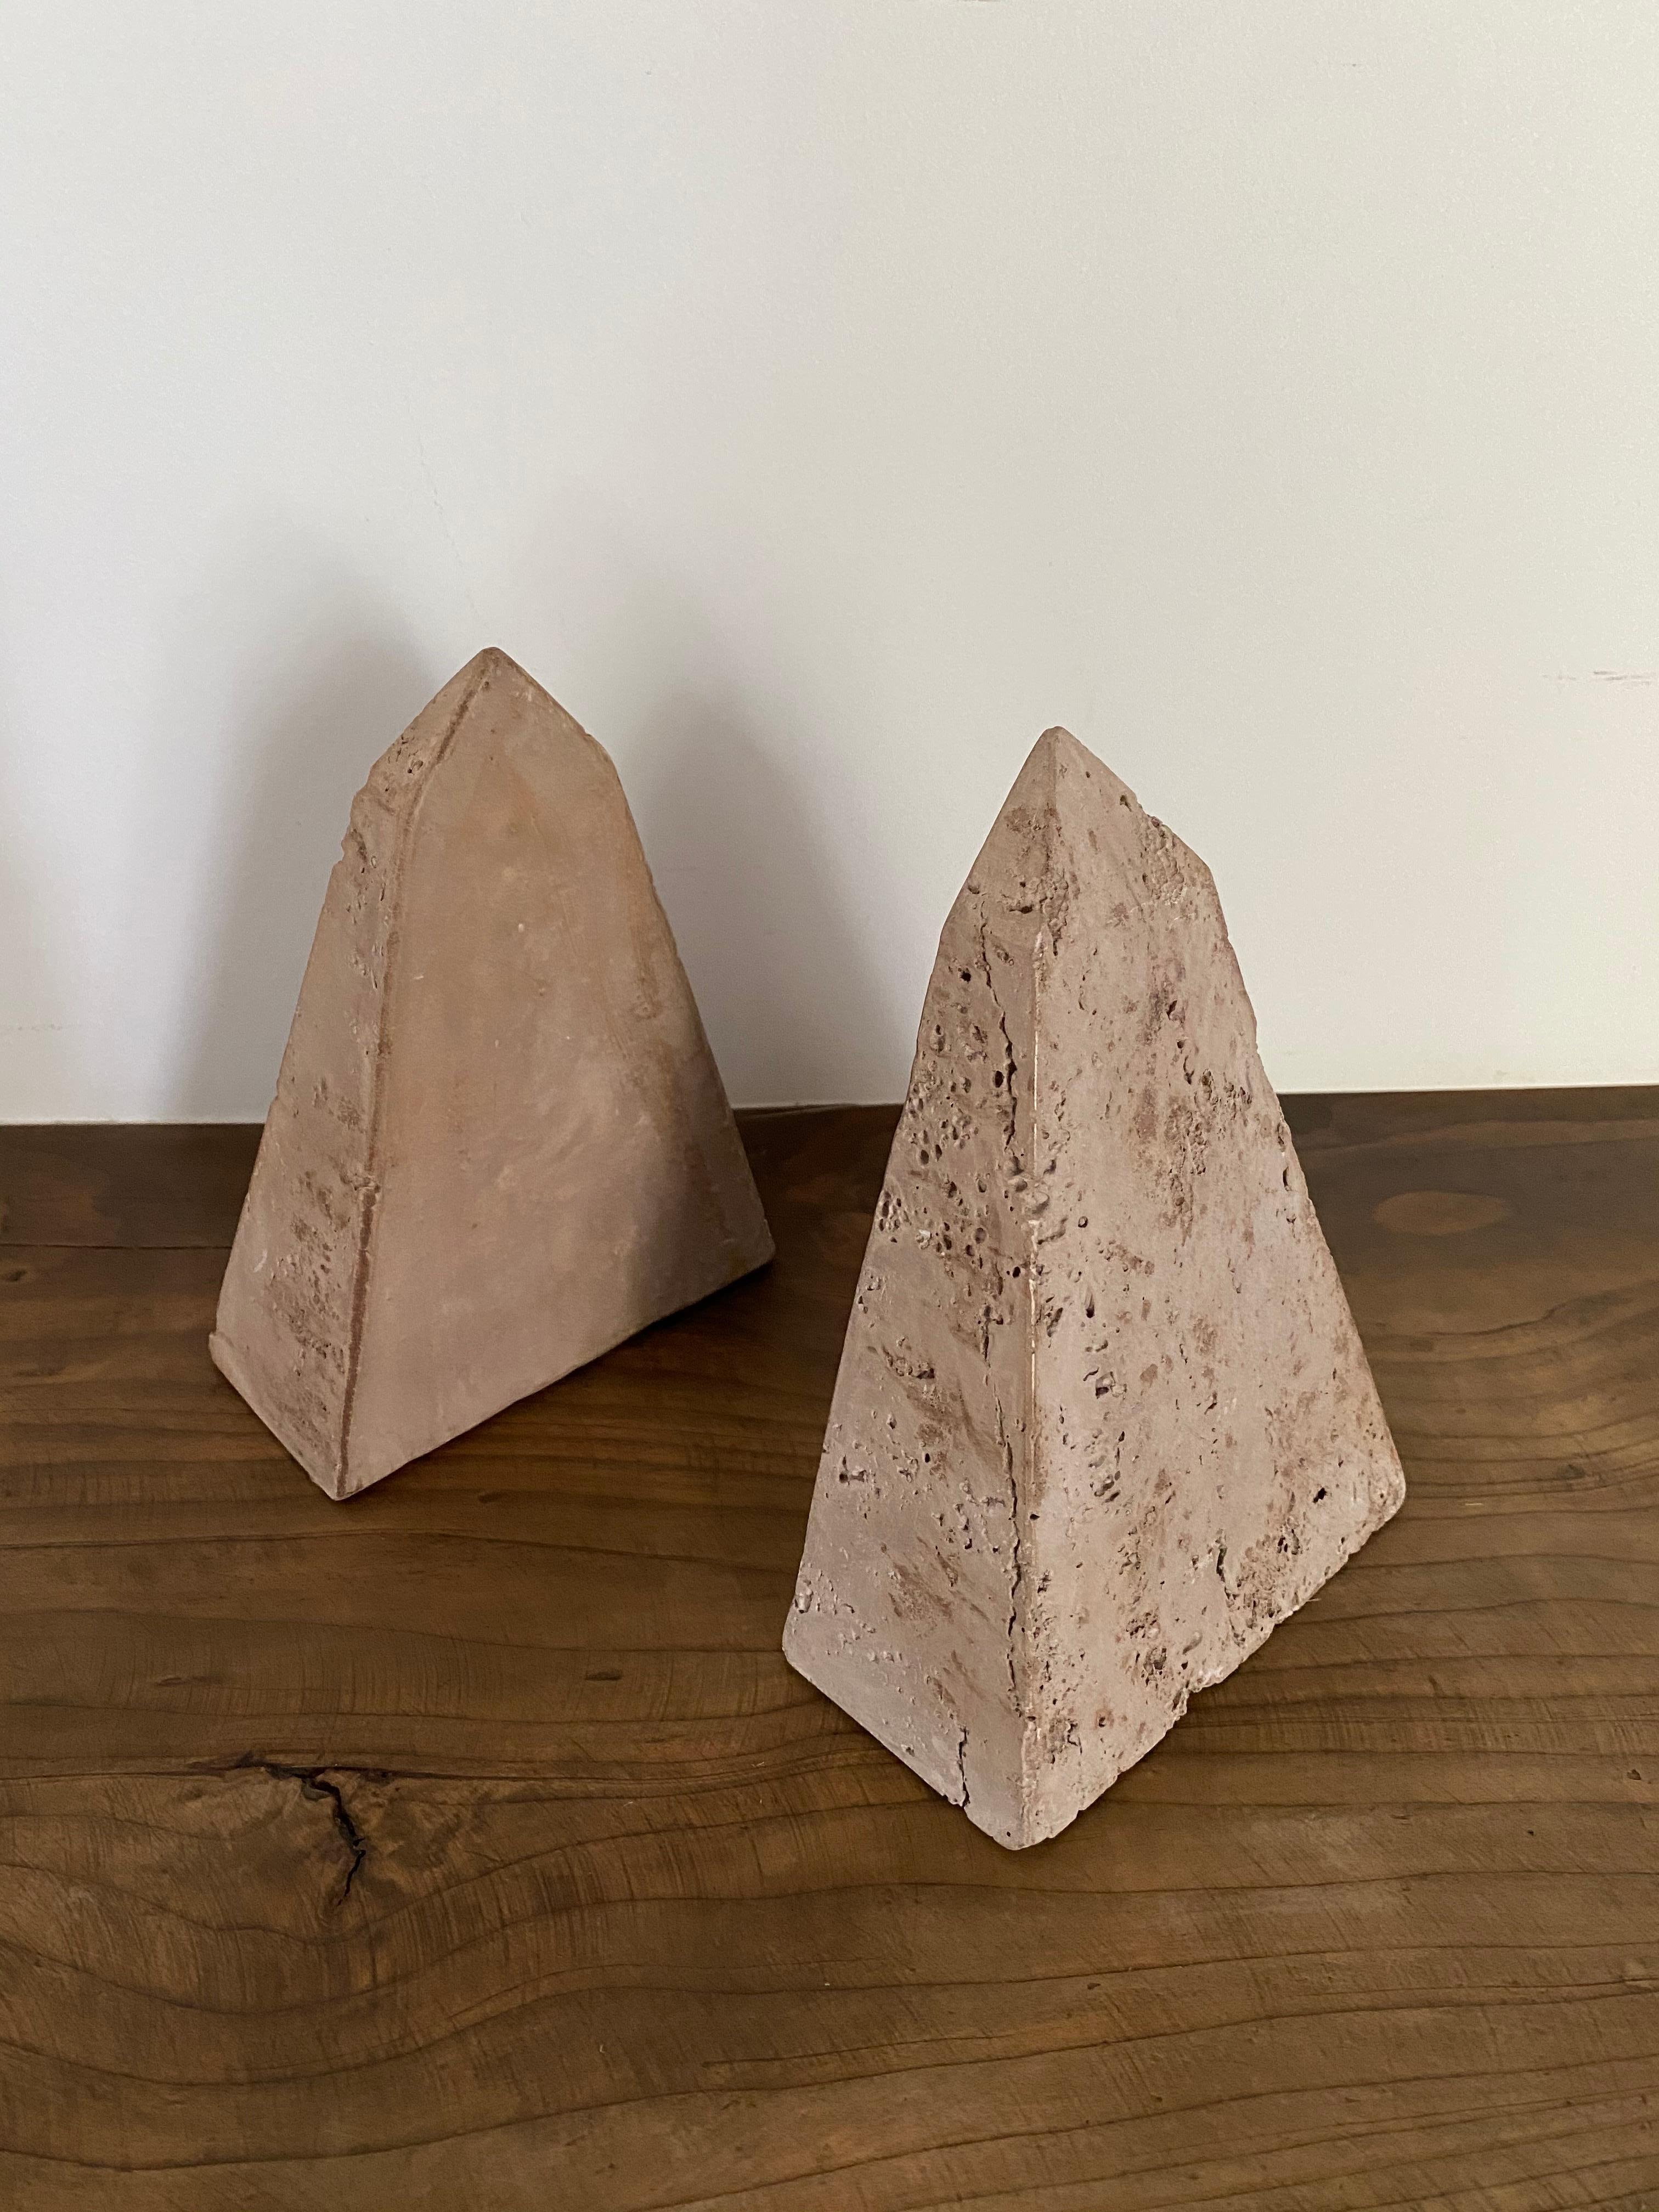 A pair of triangular/geometric travertine bookends from Italy.